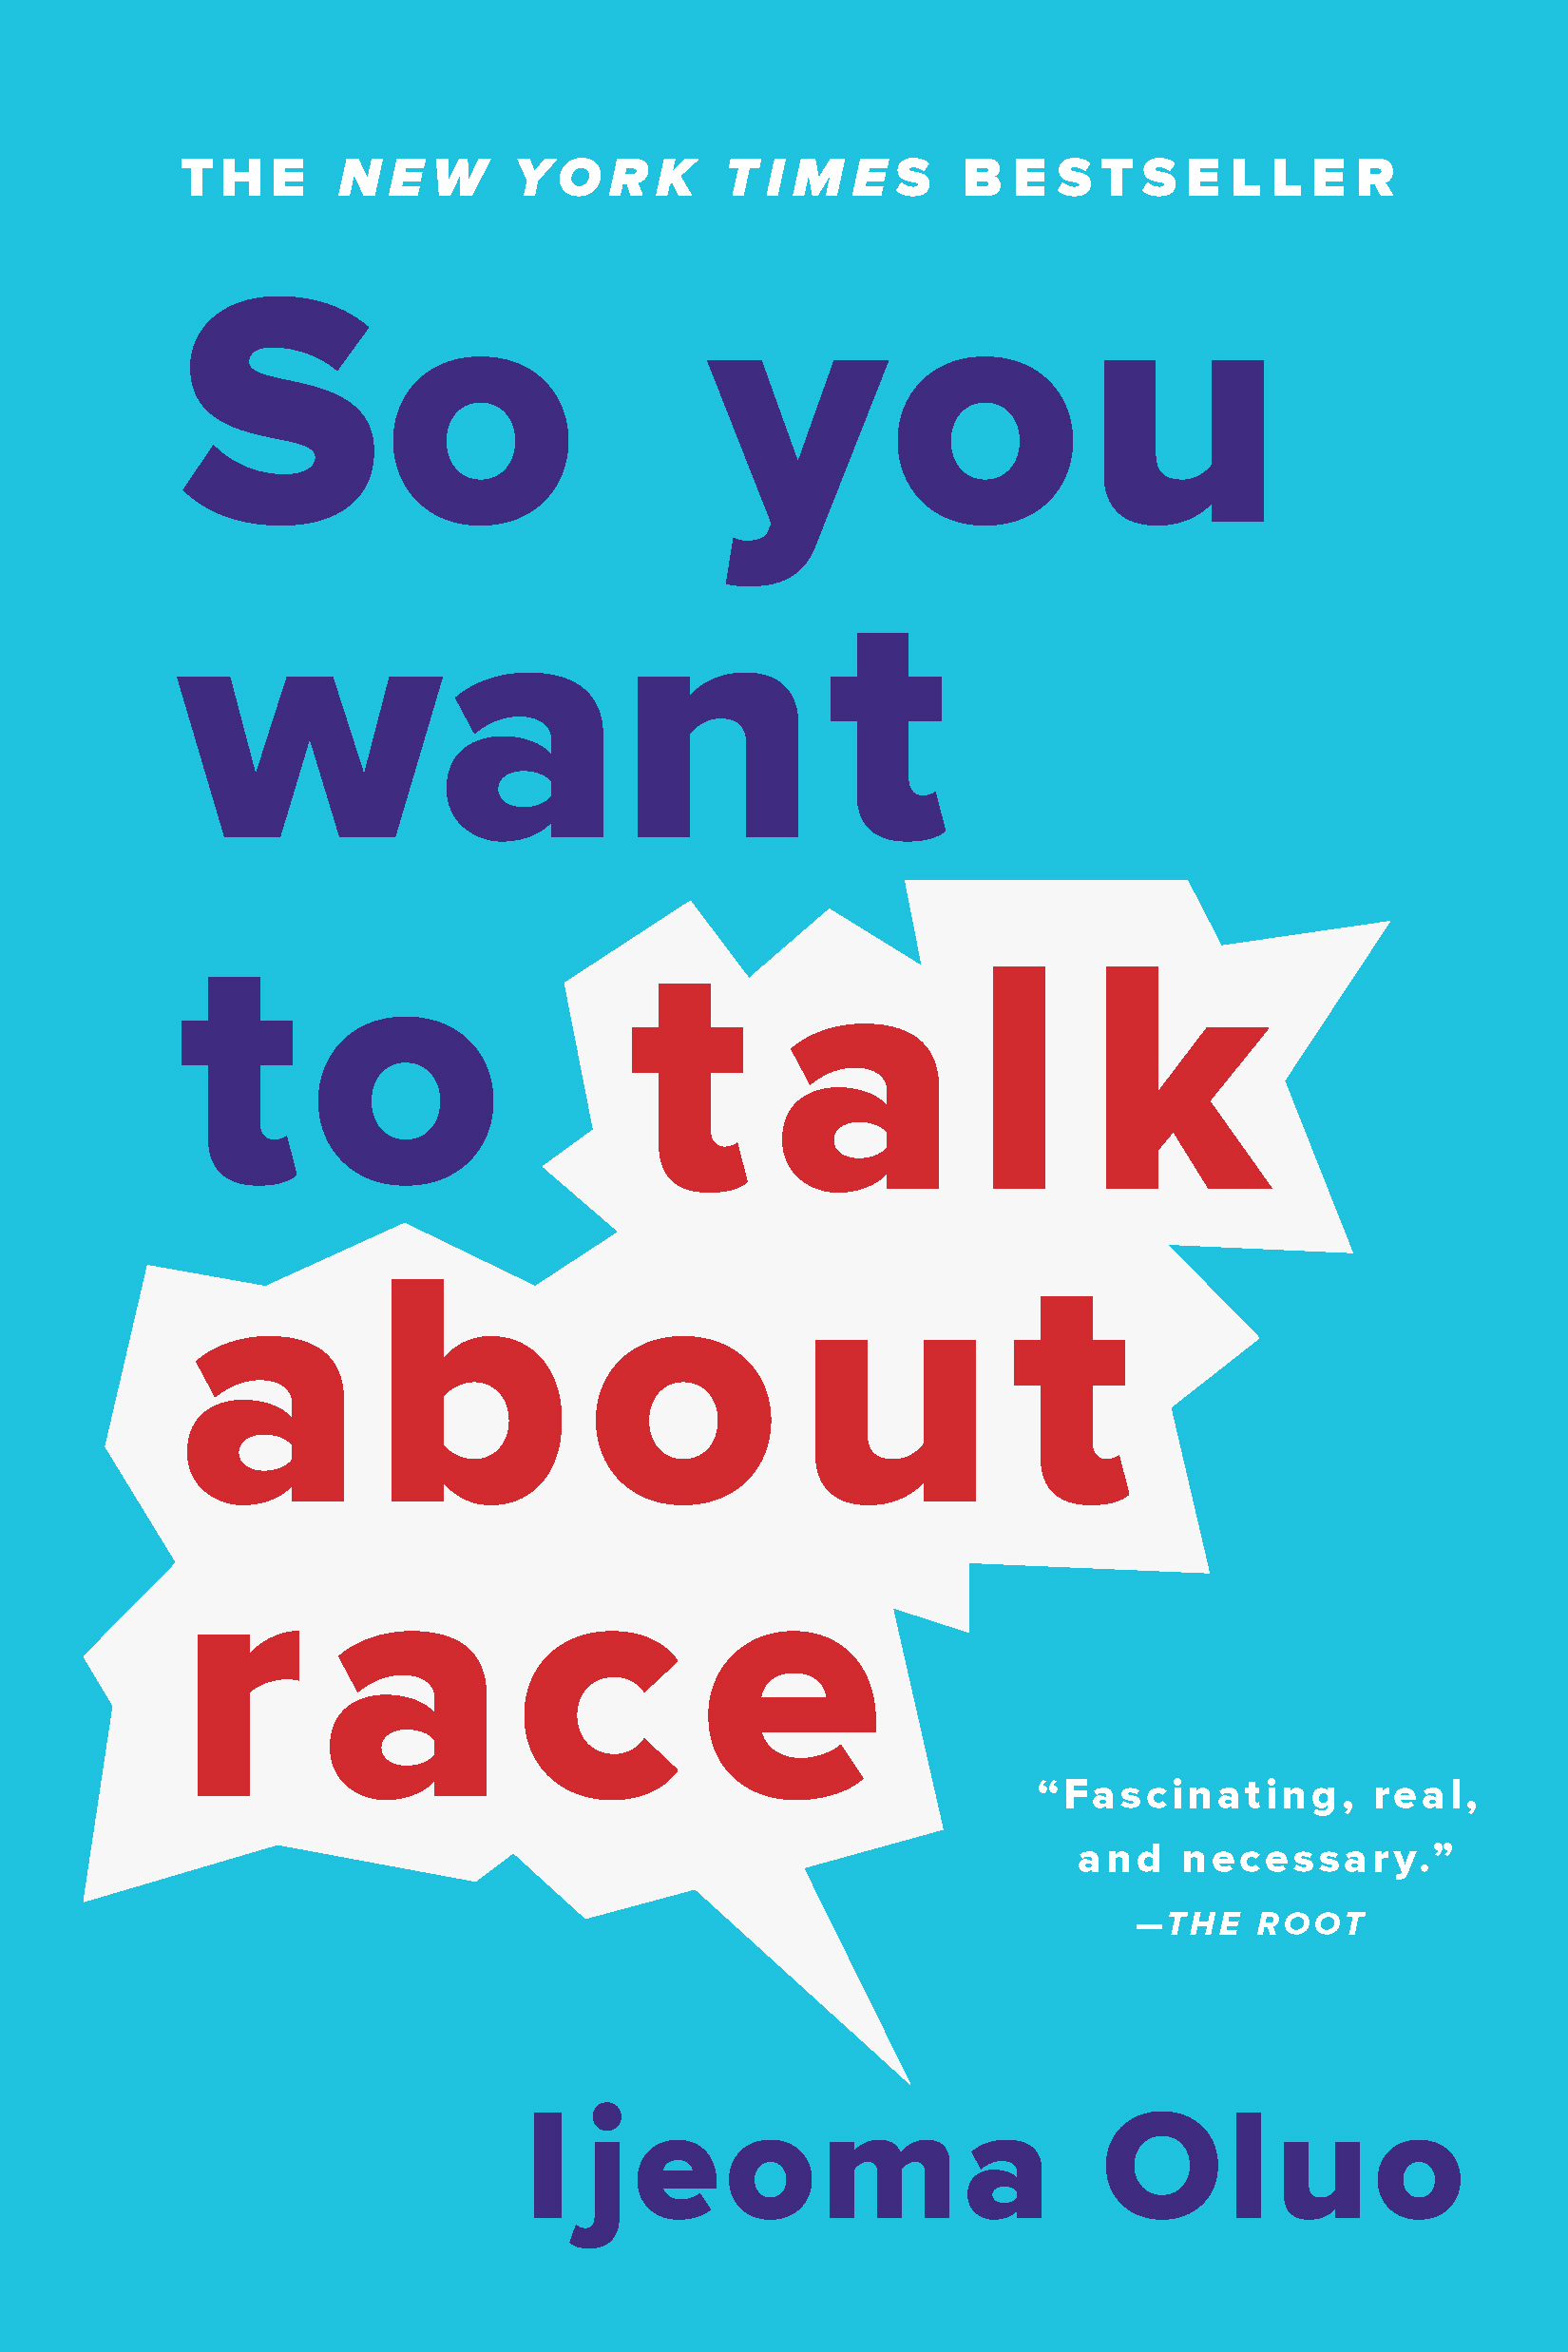 So You Want to Talk About Race by Ijeoma Oluo | Hachette Book Group